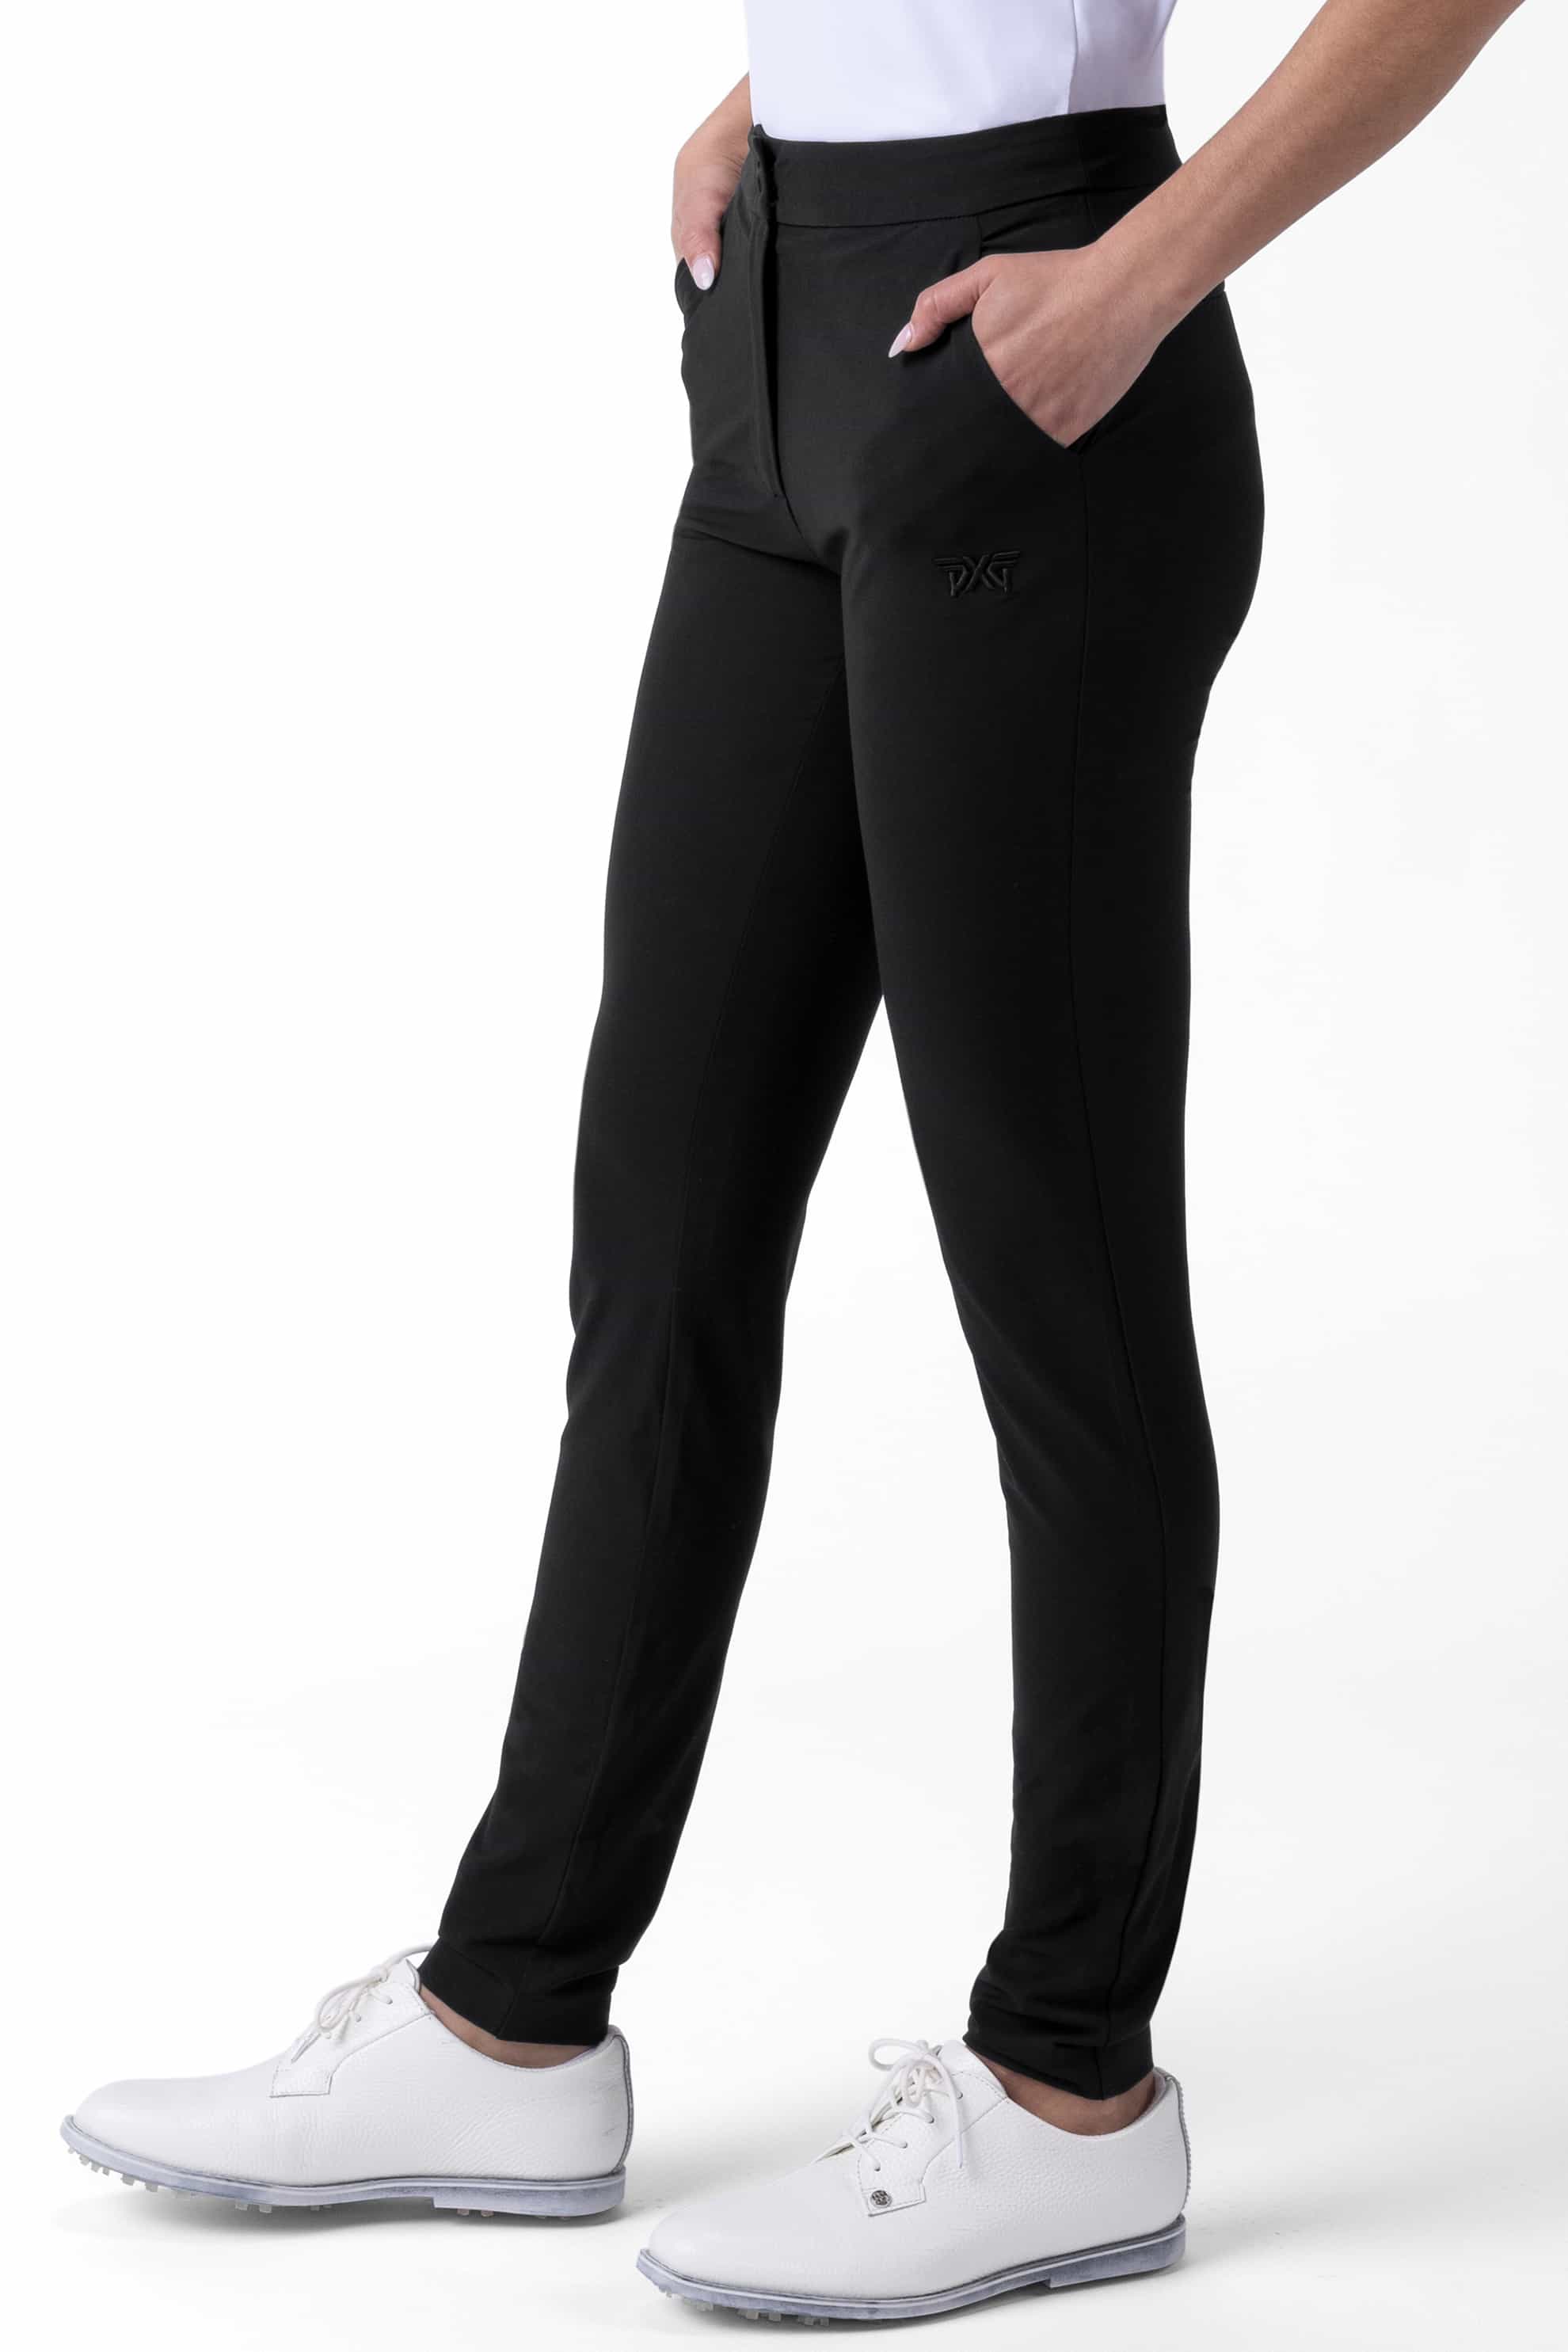 Buy Women's High-Low Ankle Golf Pant